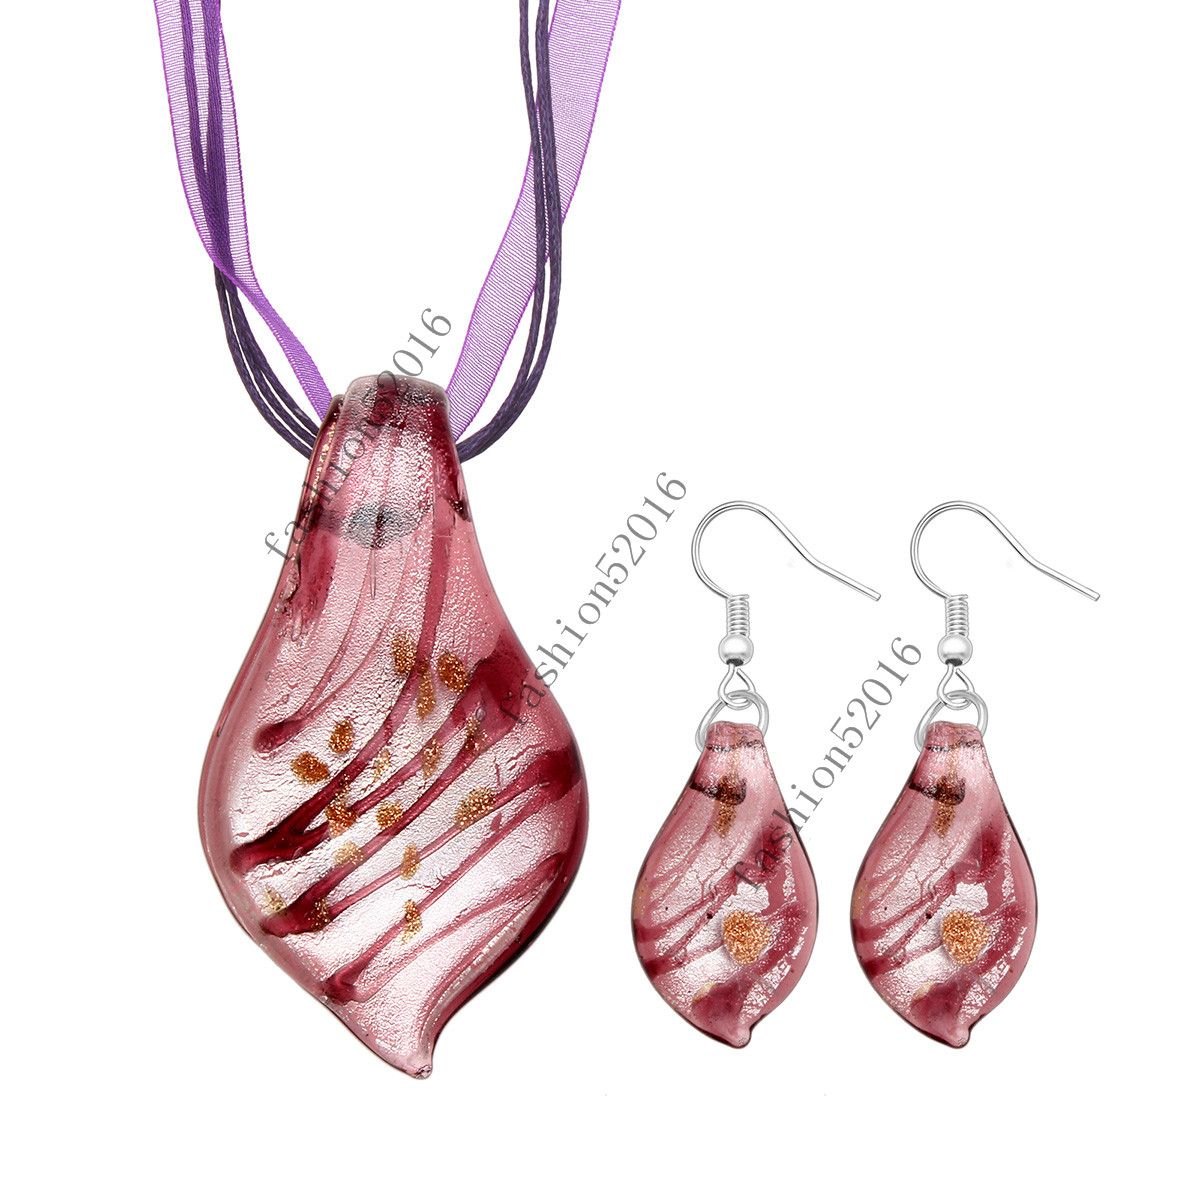 Purple Leaf Lampwork Glass Murano Bead Pendant Ribbon Necklace Cord Inside Most Up To Date Pink Murano Glass Leaf Rings (View 19 of 25)